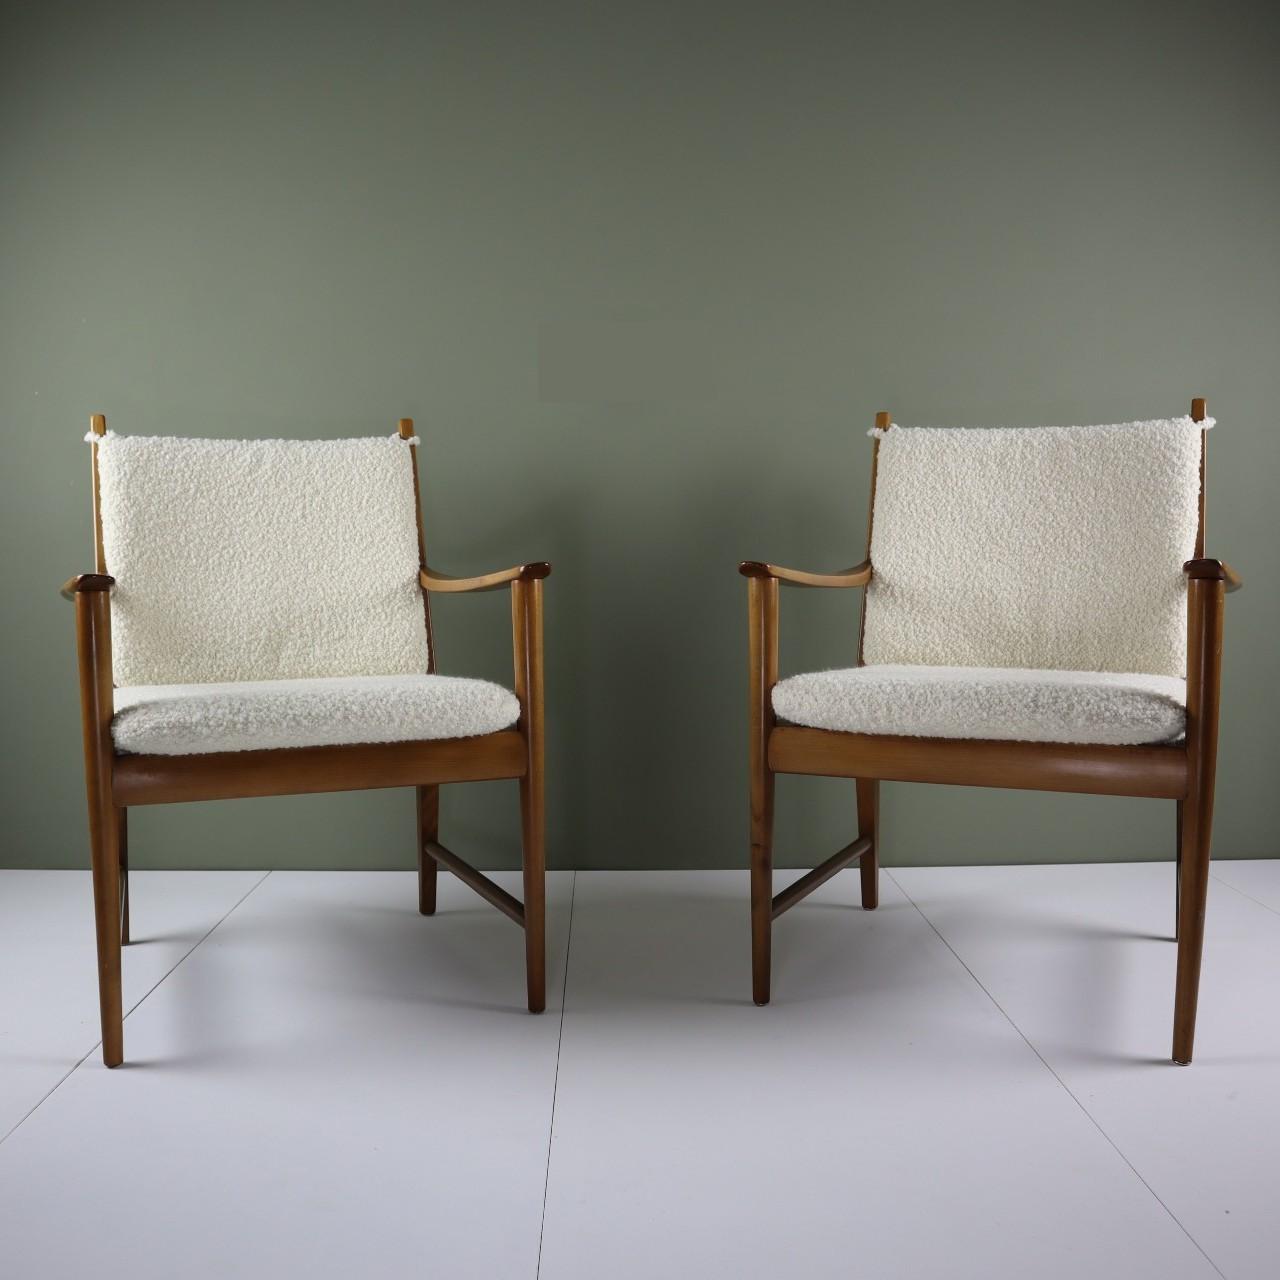 A pair of unusual midcentury armchairs in beech wood, reupholstered with an Italian-made off-white bouclé fabric from Designers Guild’s Lana collection.

These chairs were bought at an auction in June of 2021. The chairs are either Danish or